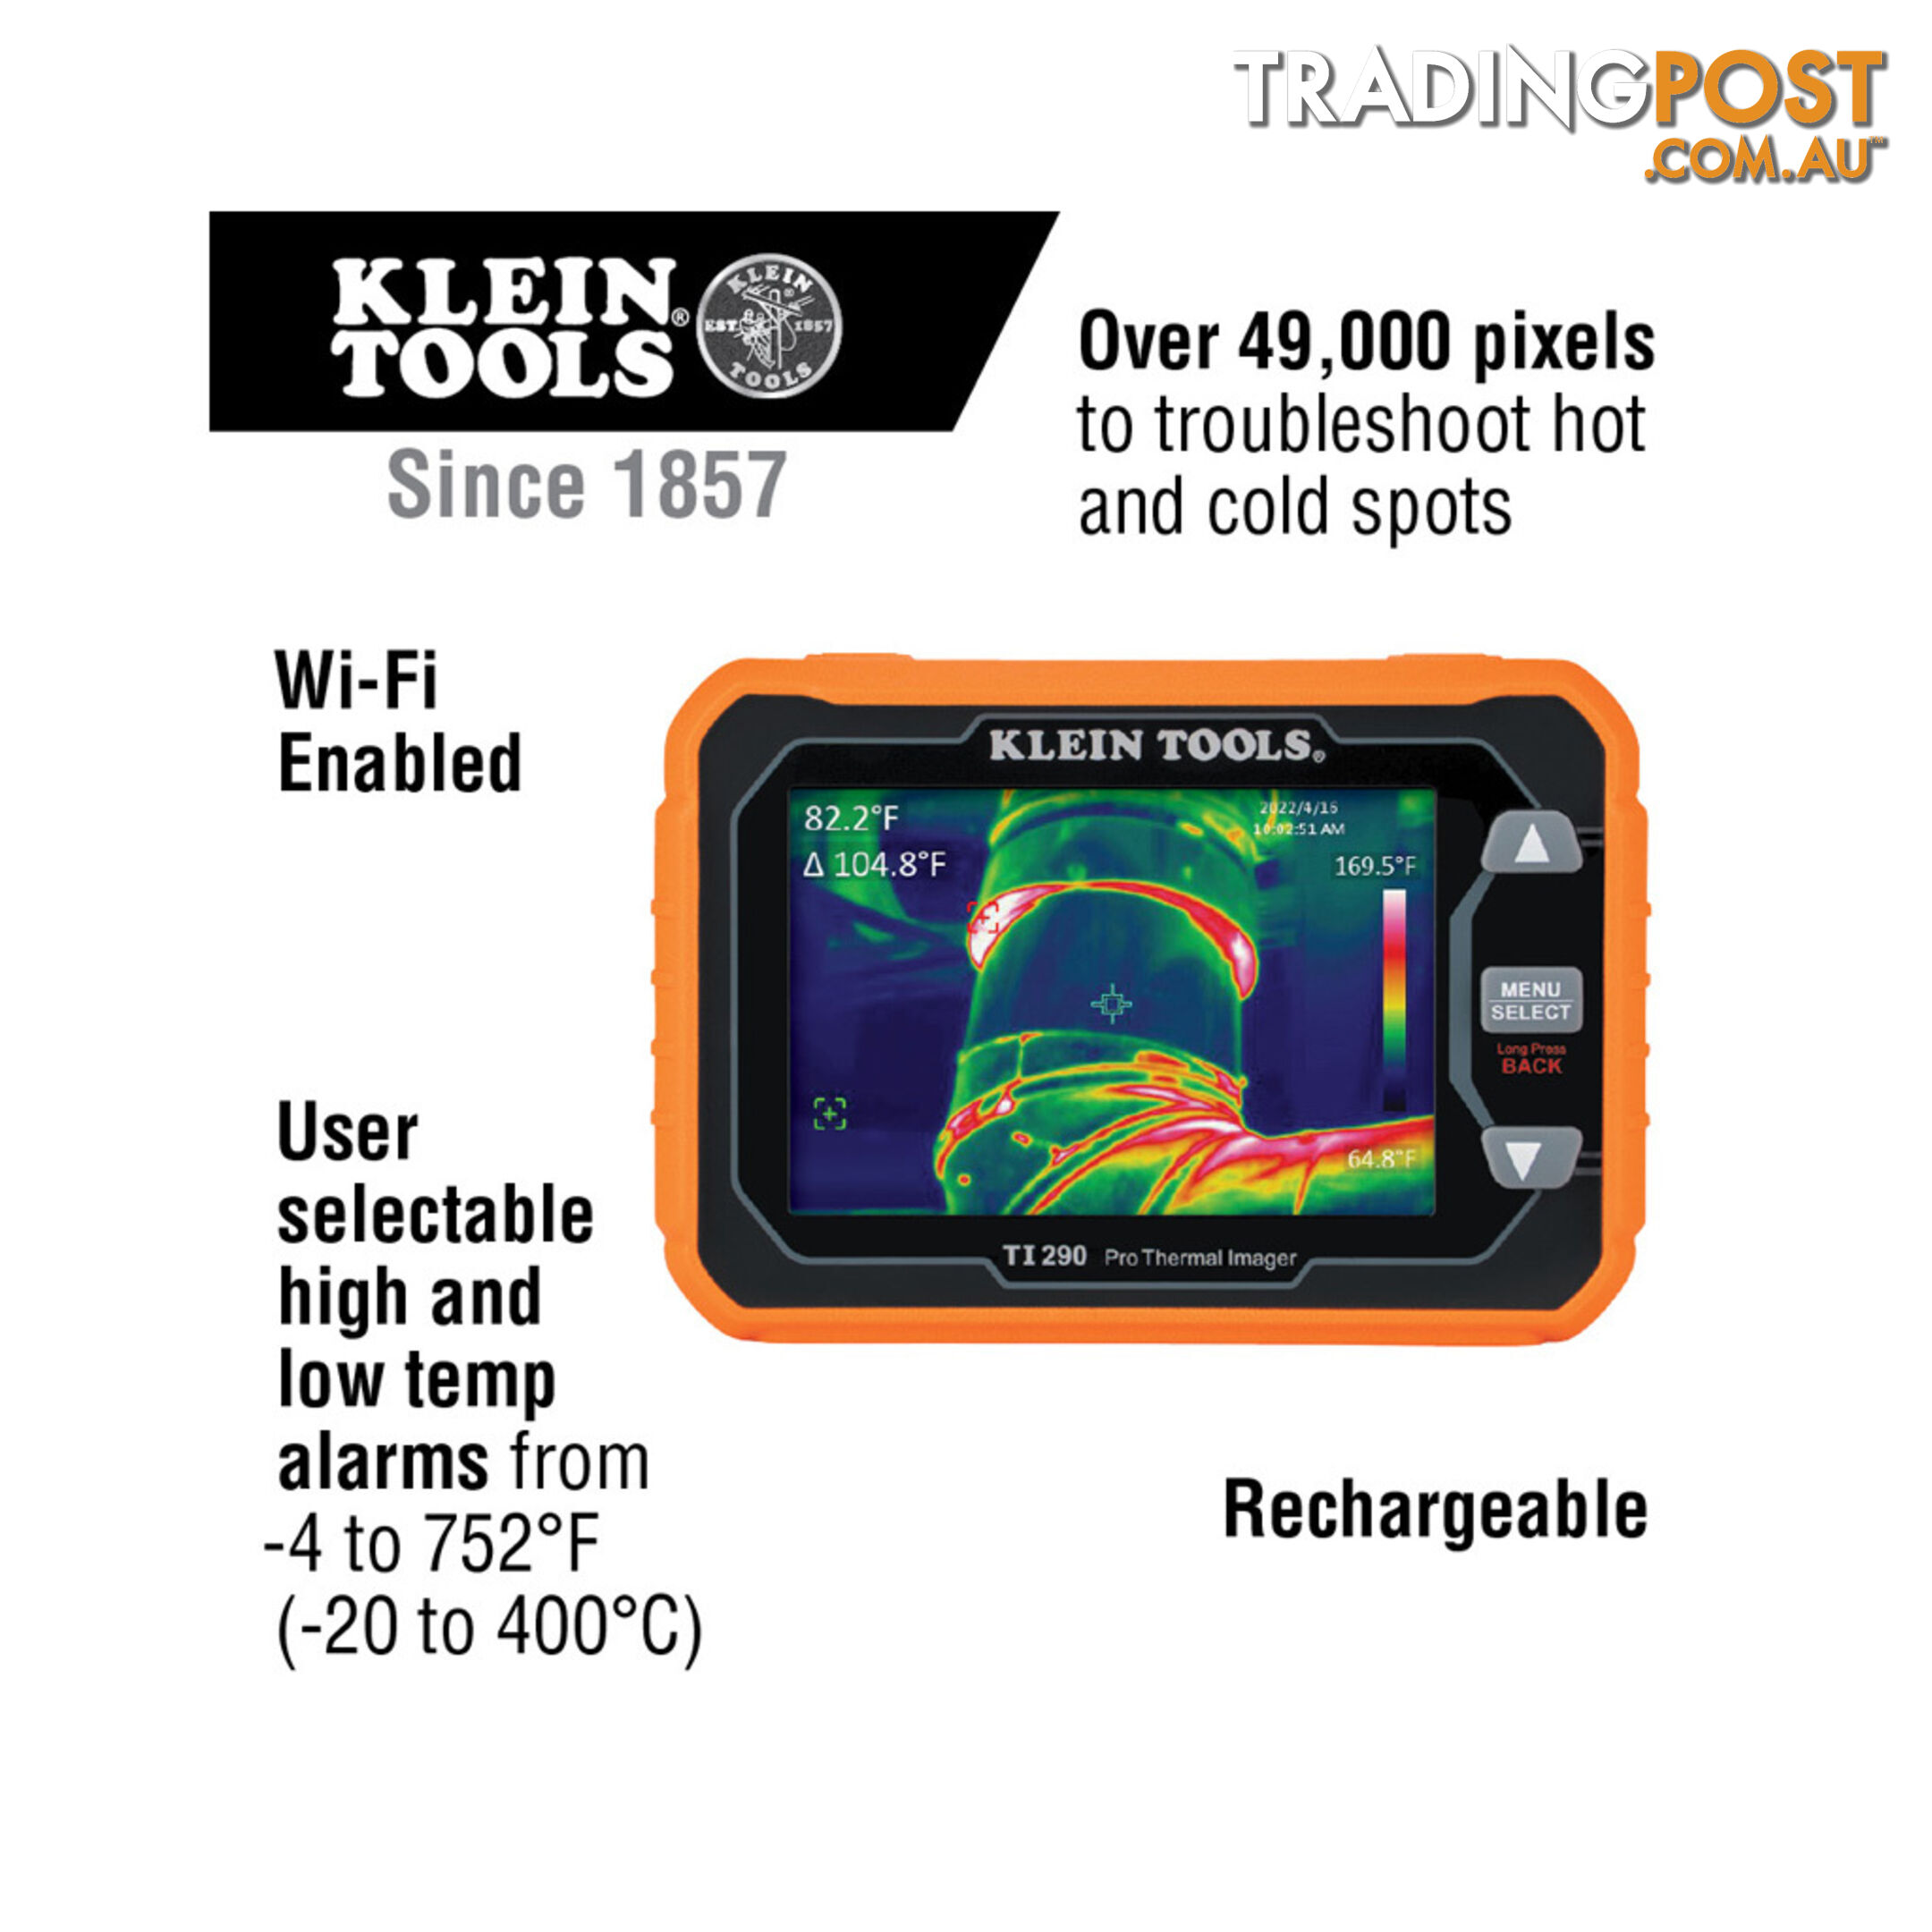 Klein Tools Rechargeable Pro Thermal Imager Over 49,000 Pixels w/ Wi-Fi SKU - TI290